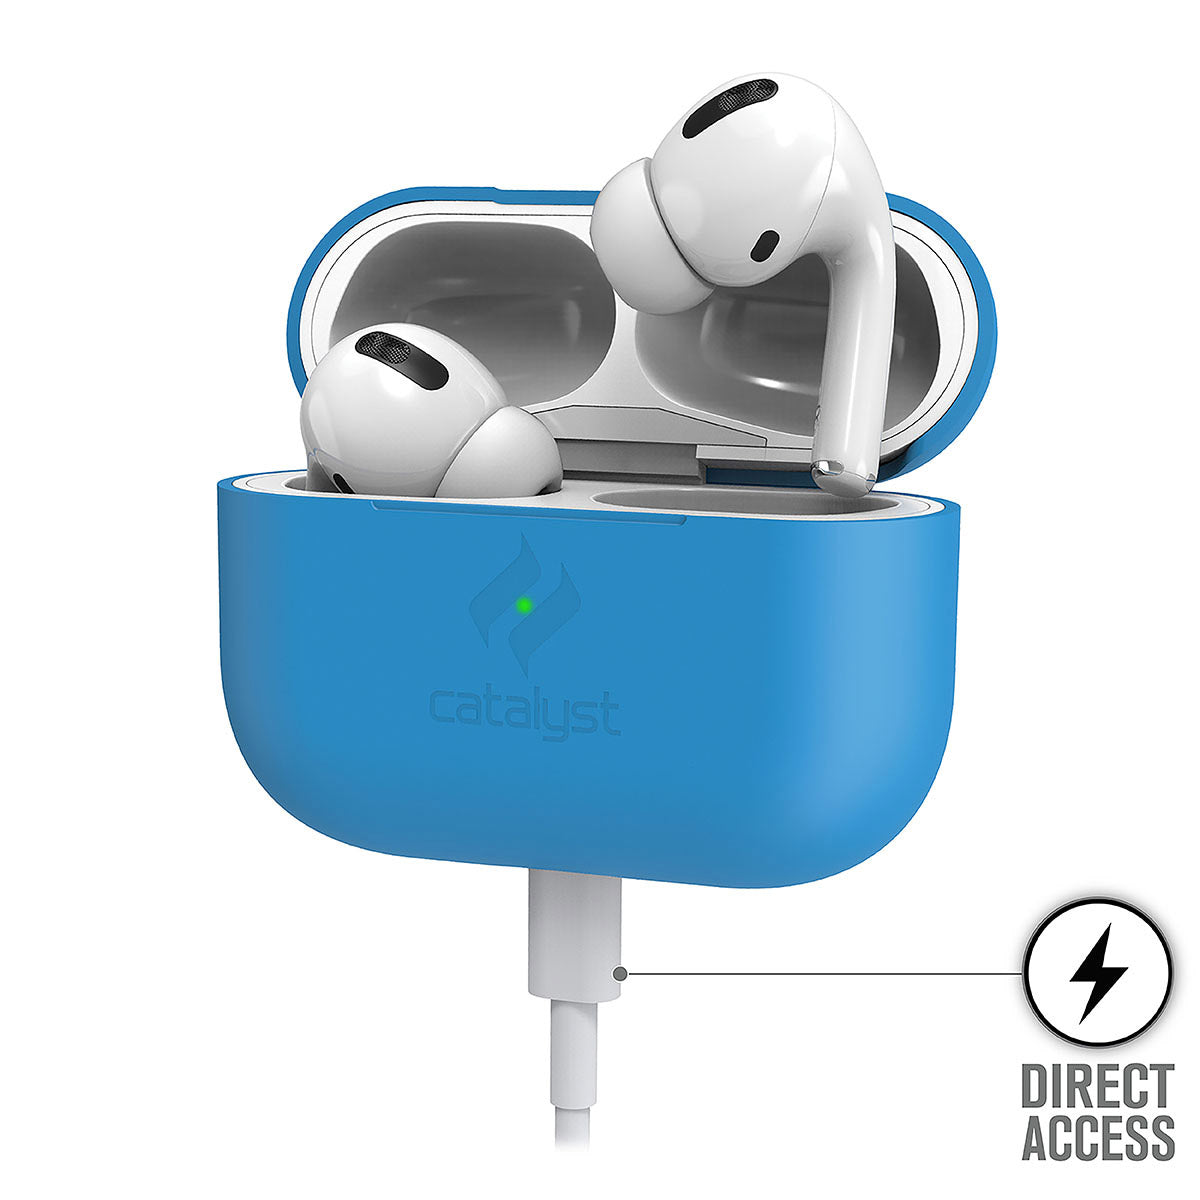 Catalyst airpods pro gen 2/1 slim case showing the case while charging in an neon blue colorway text reads direct access